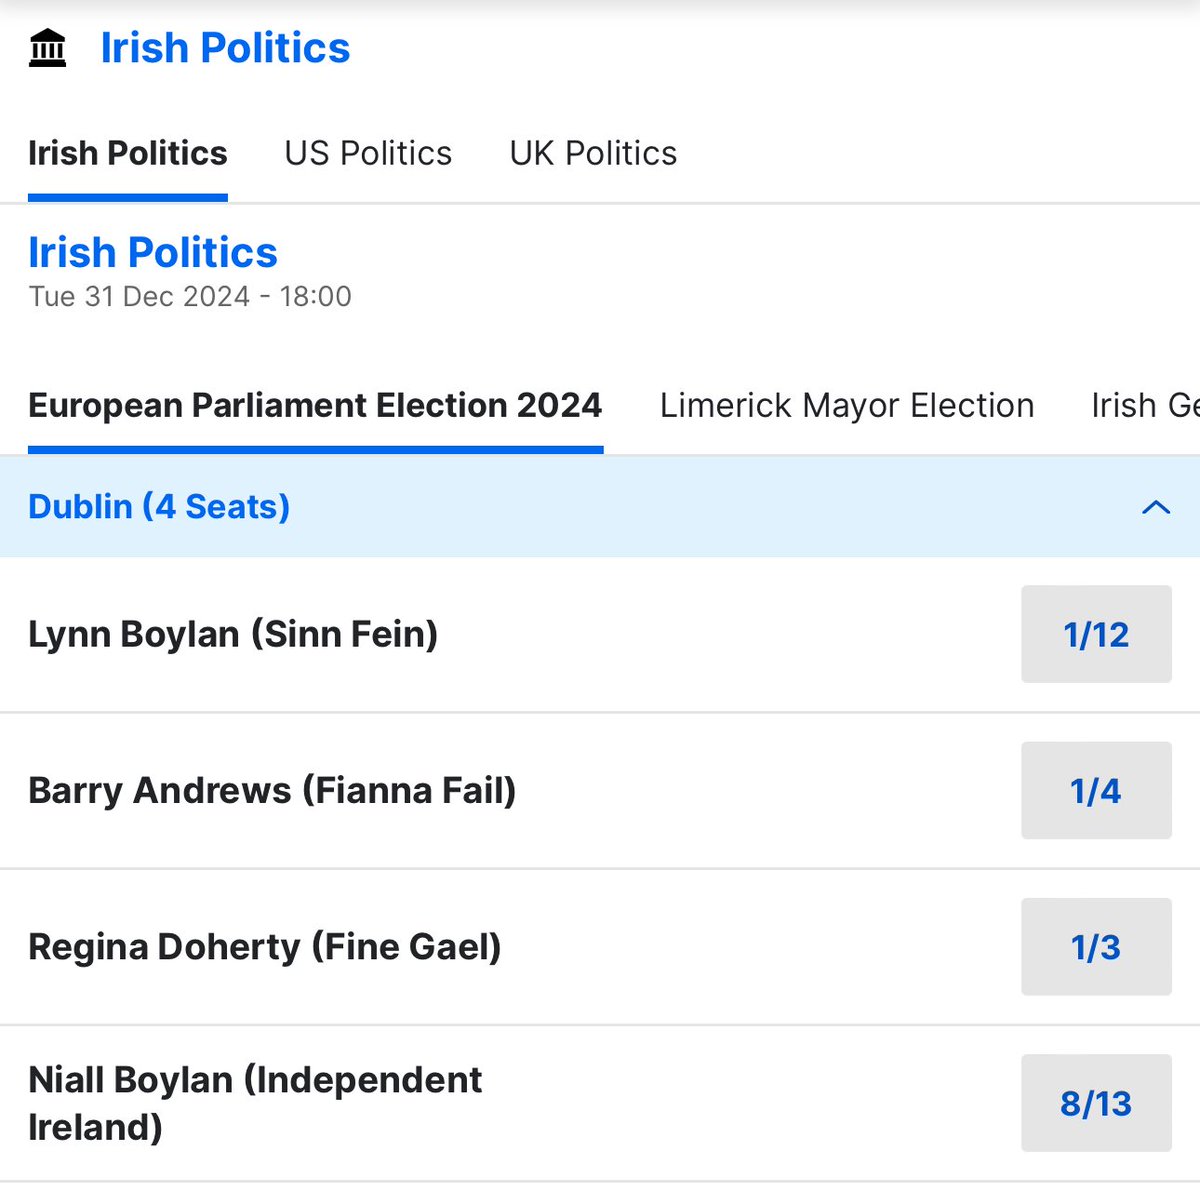 Looking at the betting odds, I imagine the establishment are worried as the pundits have me in line for a seat in Europe. Let’s keep this going and VOTE NO to the government and establishment party candidates. Vote YES for me and we can kick them in the arse. #VoteNiallBoylanNo1